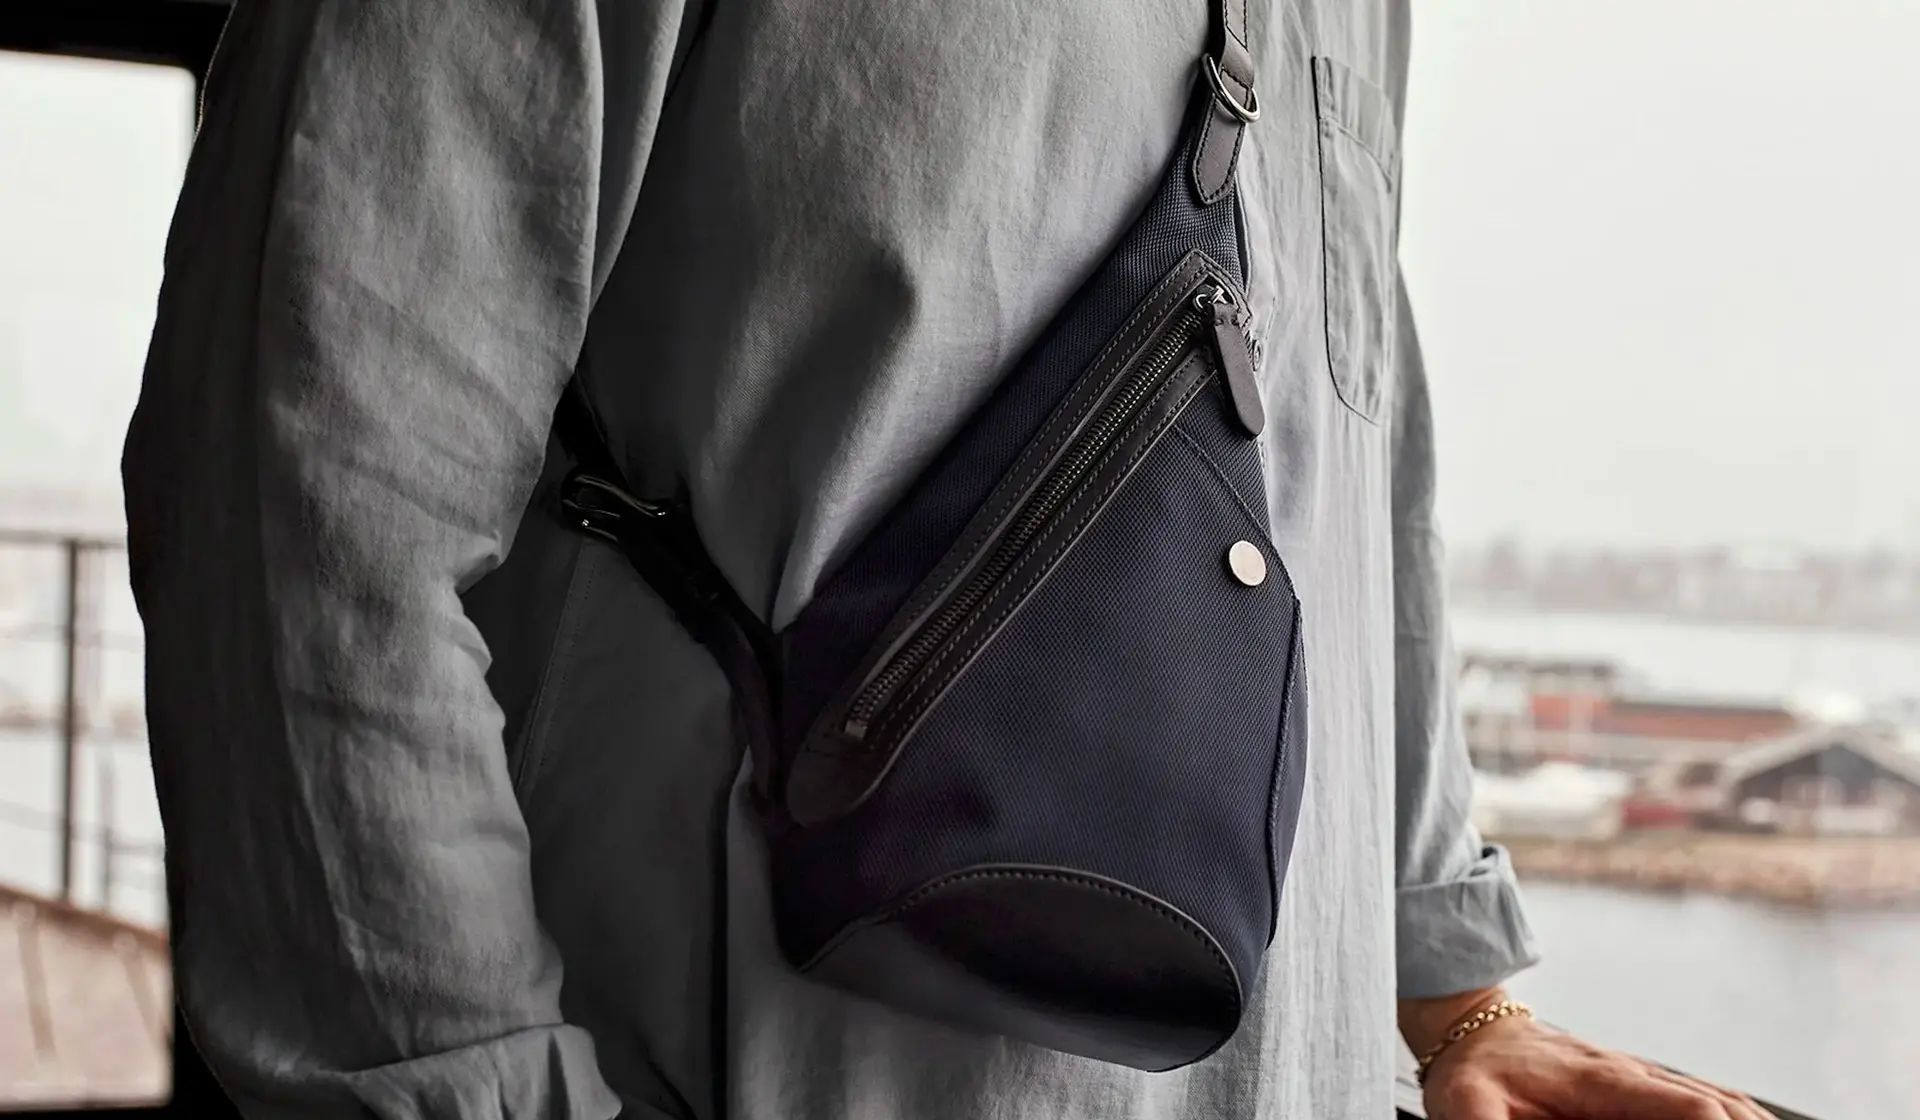 10 Best Man Purse For Everyday Practical Travel in 2023